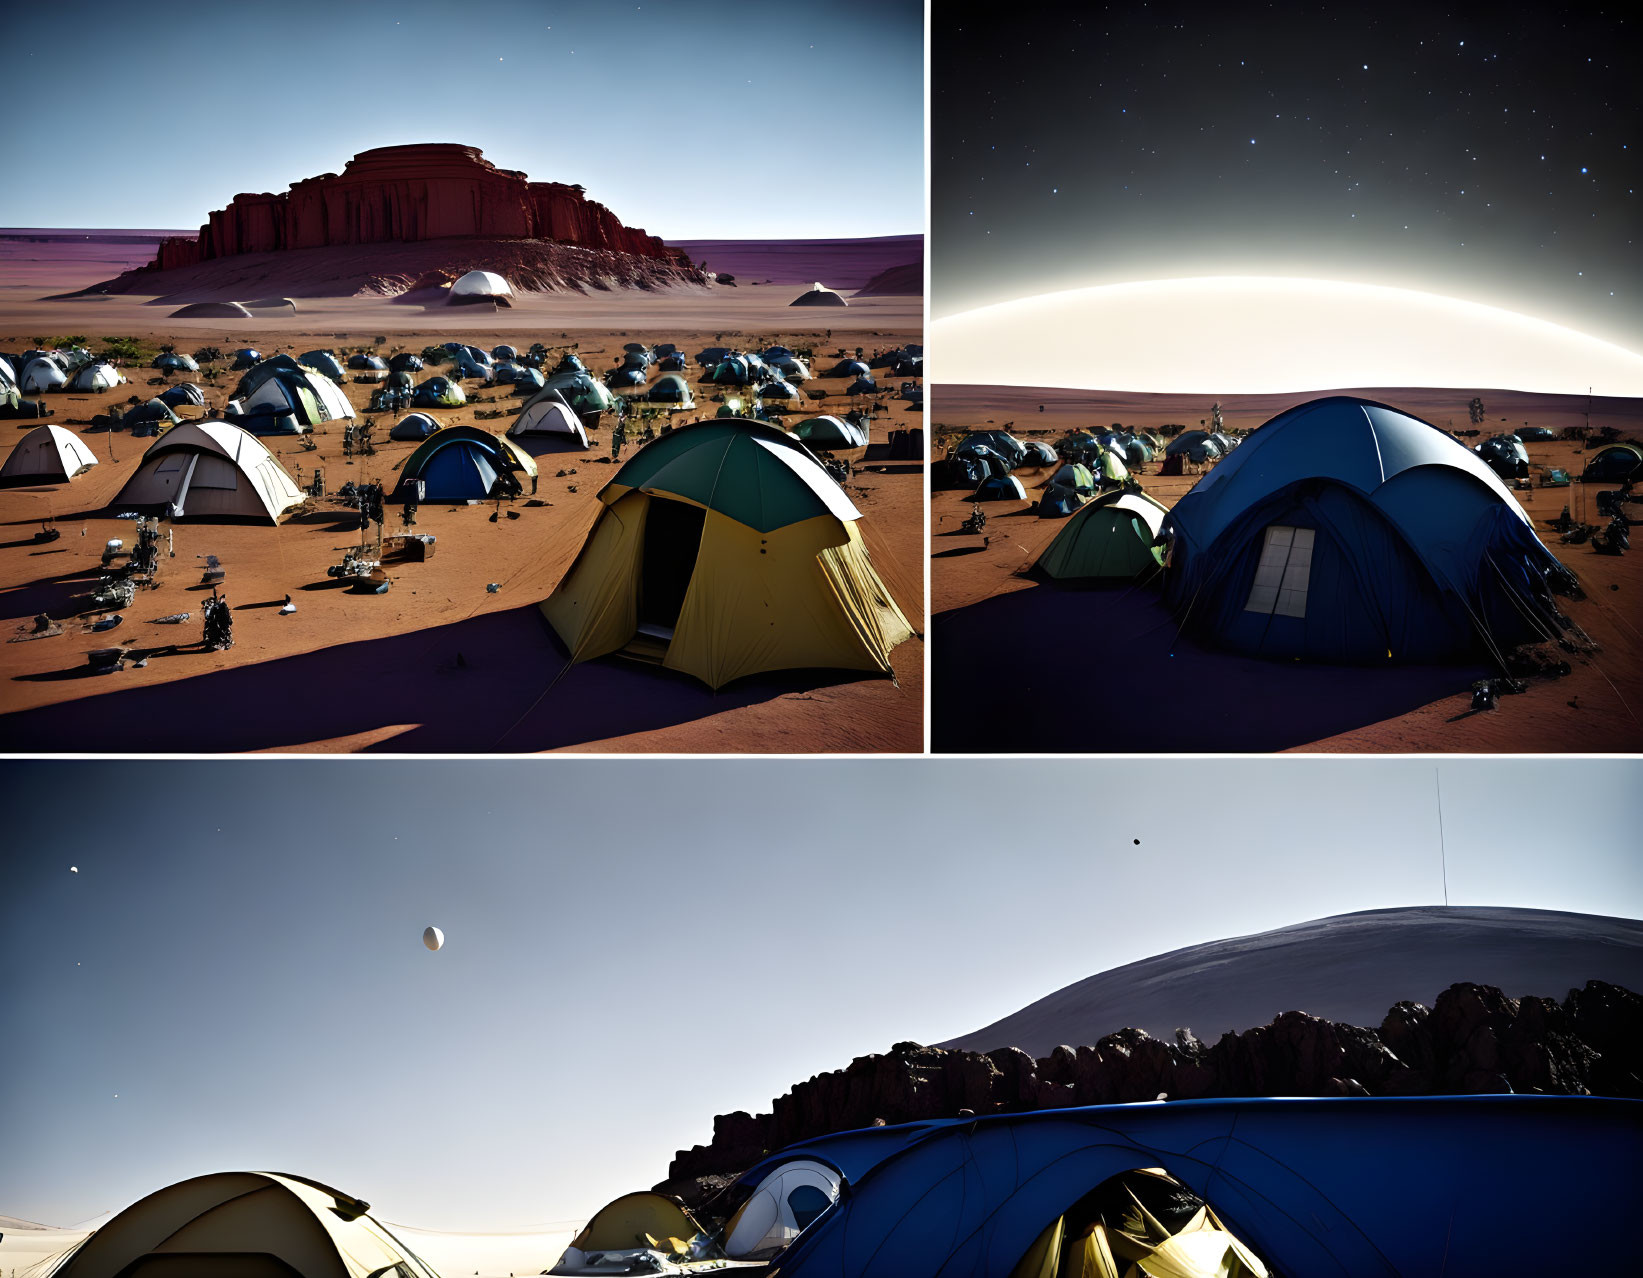 Desert Campsite with Tents, Rock Formations, and Starry Night Sky